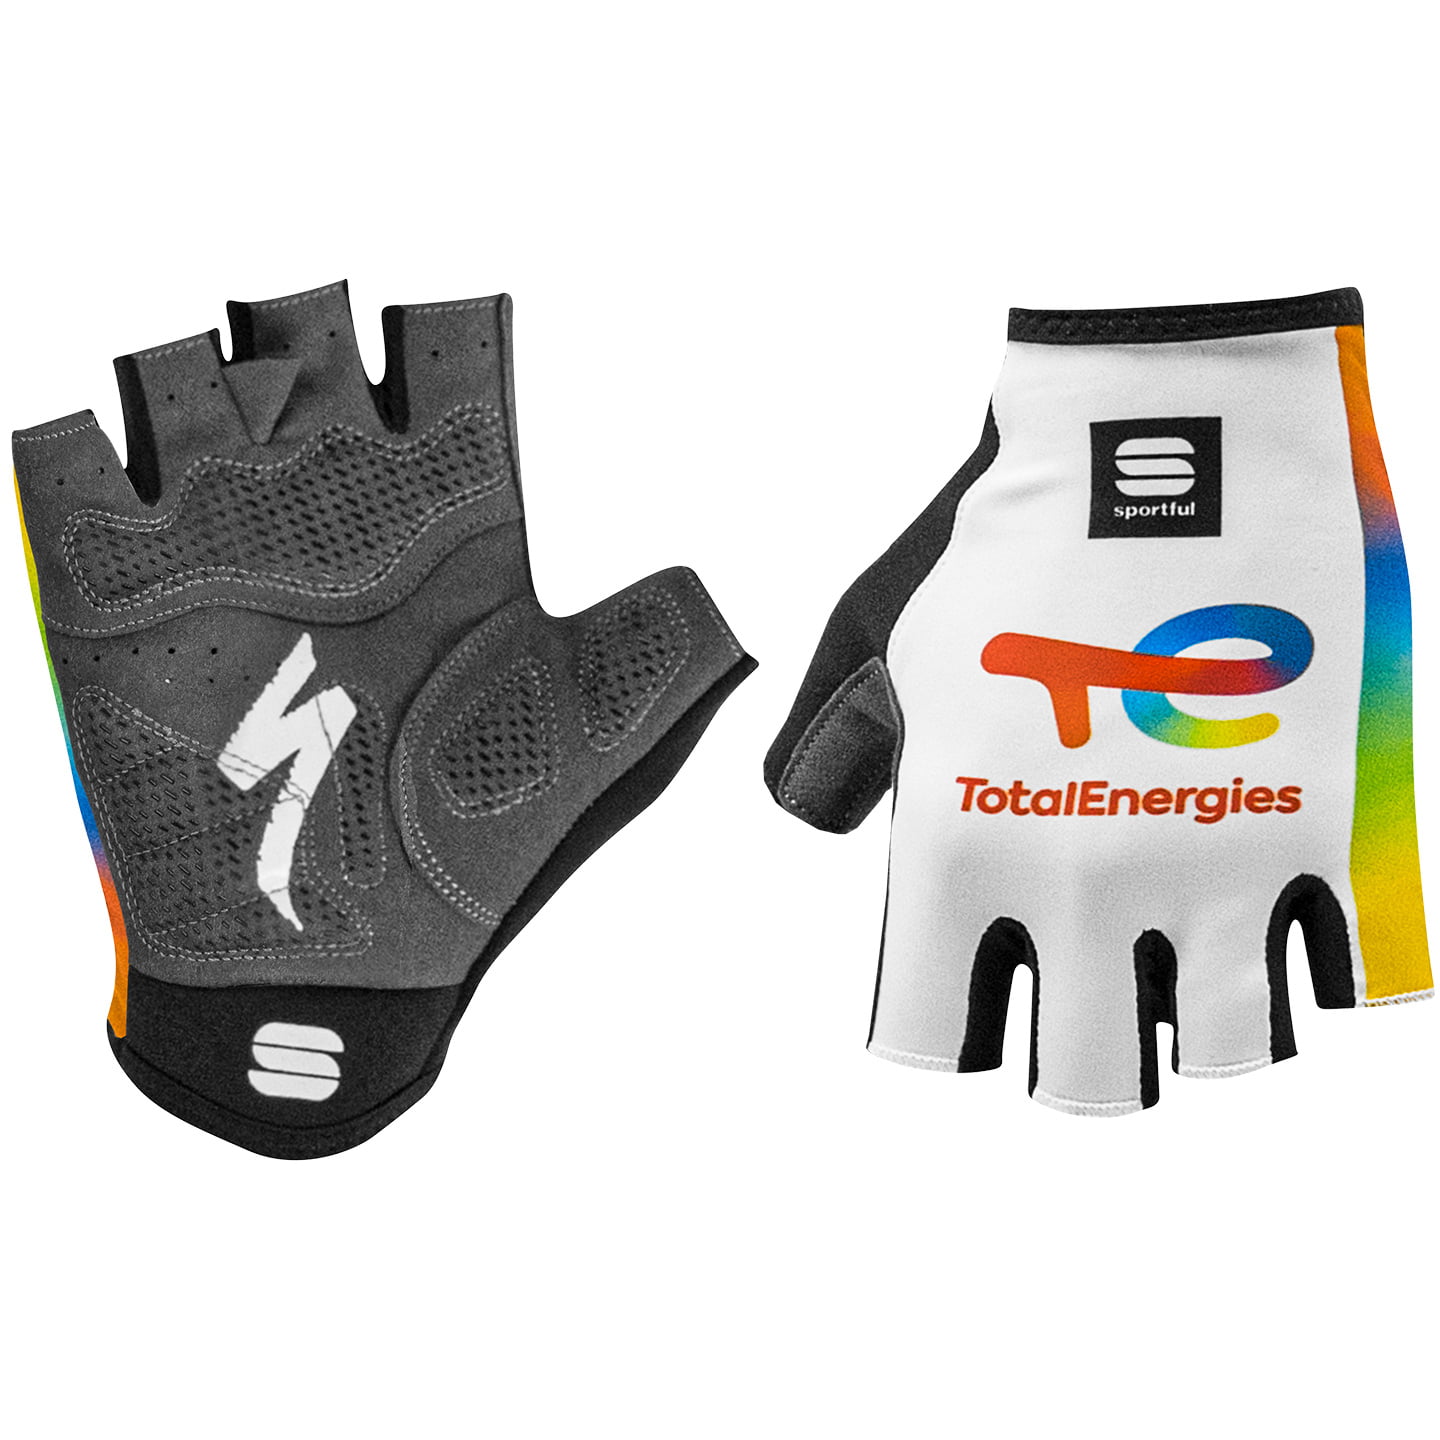 TEAM TOTALENERGIES 2023 Cycling Gloves, for men, size S, Cycling gloves, Cycling clothing